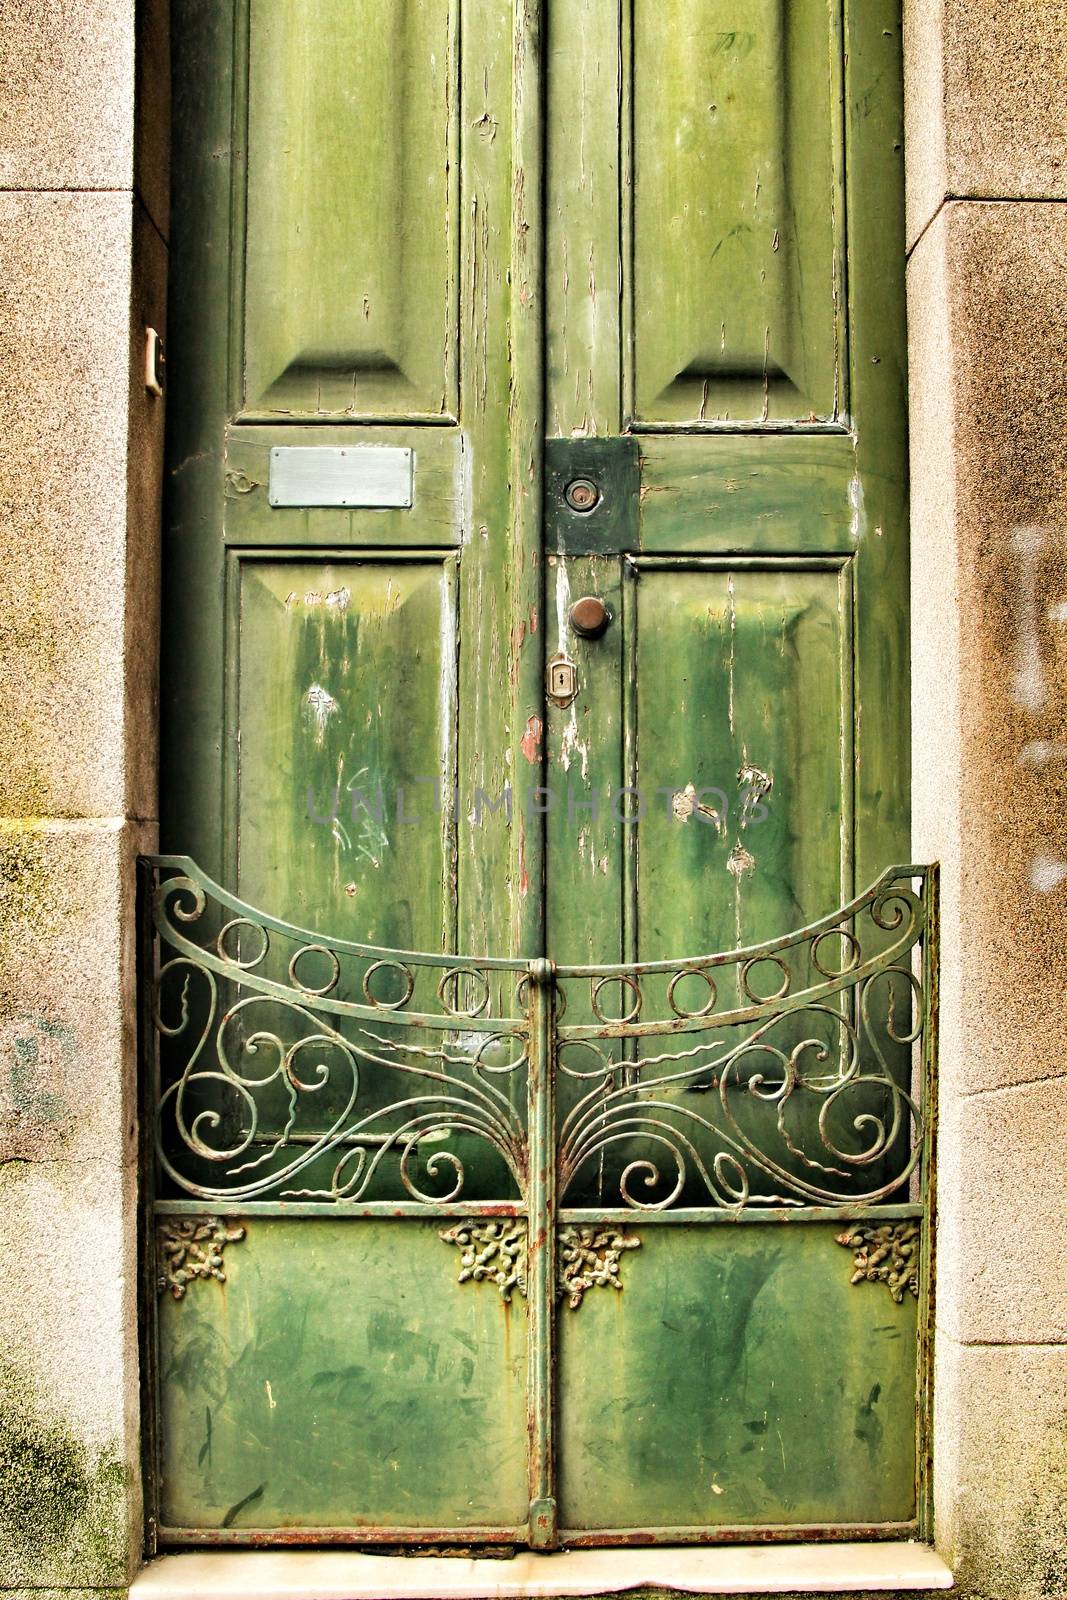 Old wooden green door with wrought iron fence in Porto, Portugal